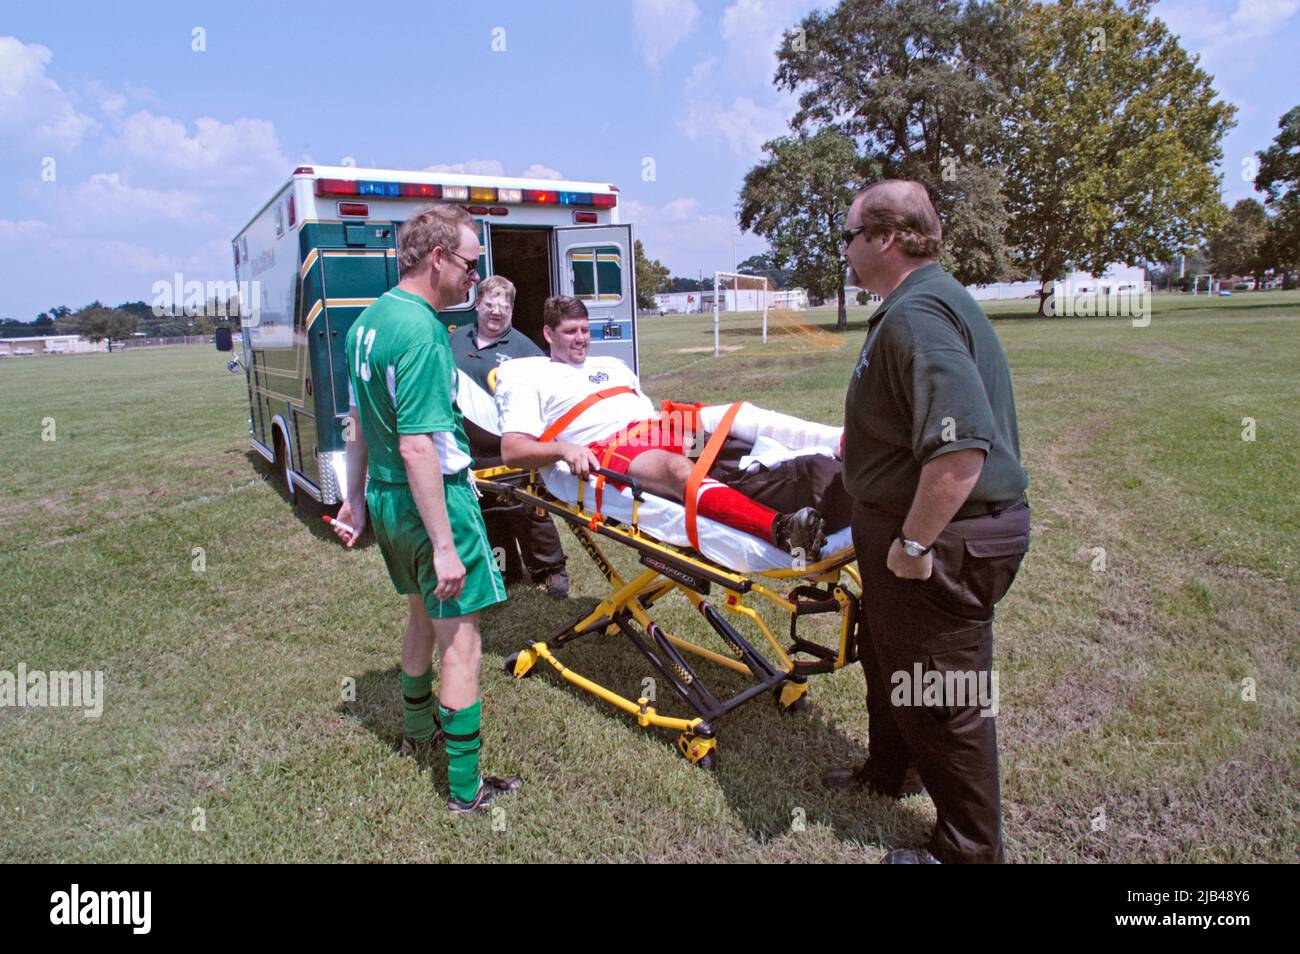 Soccer player, adult man with a broken leg is put in ambulance on stretcher by medics during Game which was co-ed, both men and women on the teams Stock Photo